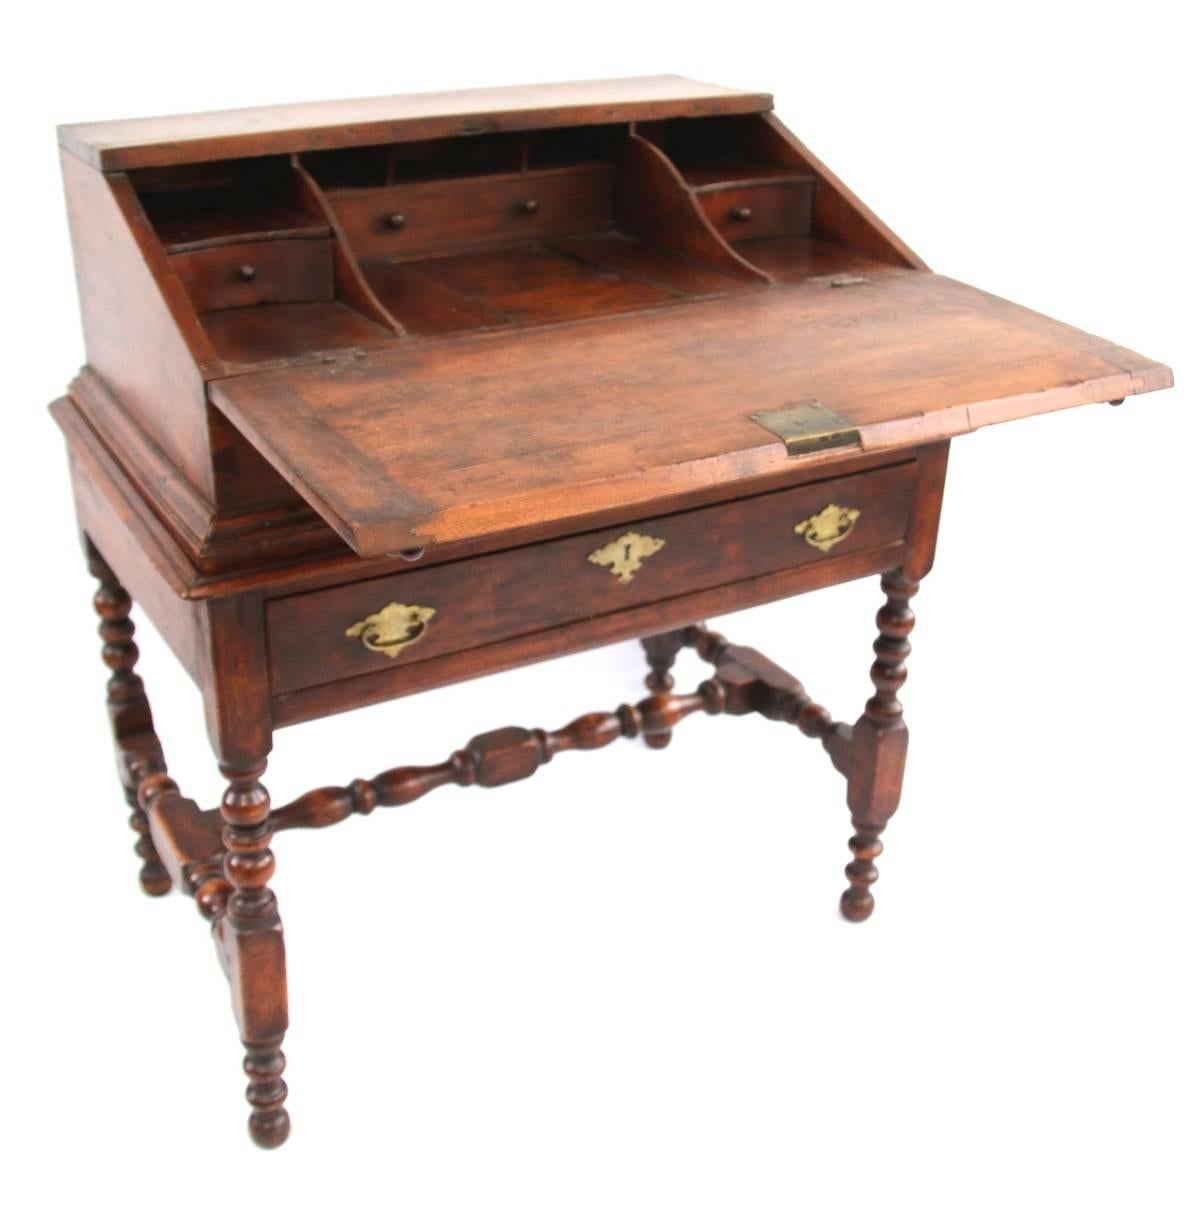 Fine rectangular maple box with hinged writing slope lid opening to an interior with five compartments and three drawers. Interior also features a well with sliding door. Desk projects above a rectangular frame- the frieze fitted with single fitted